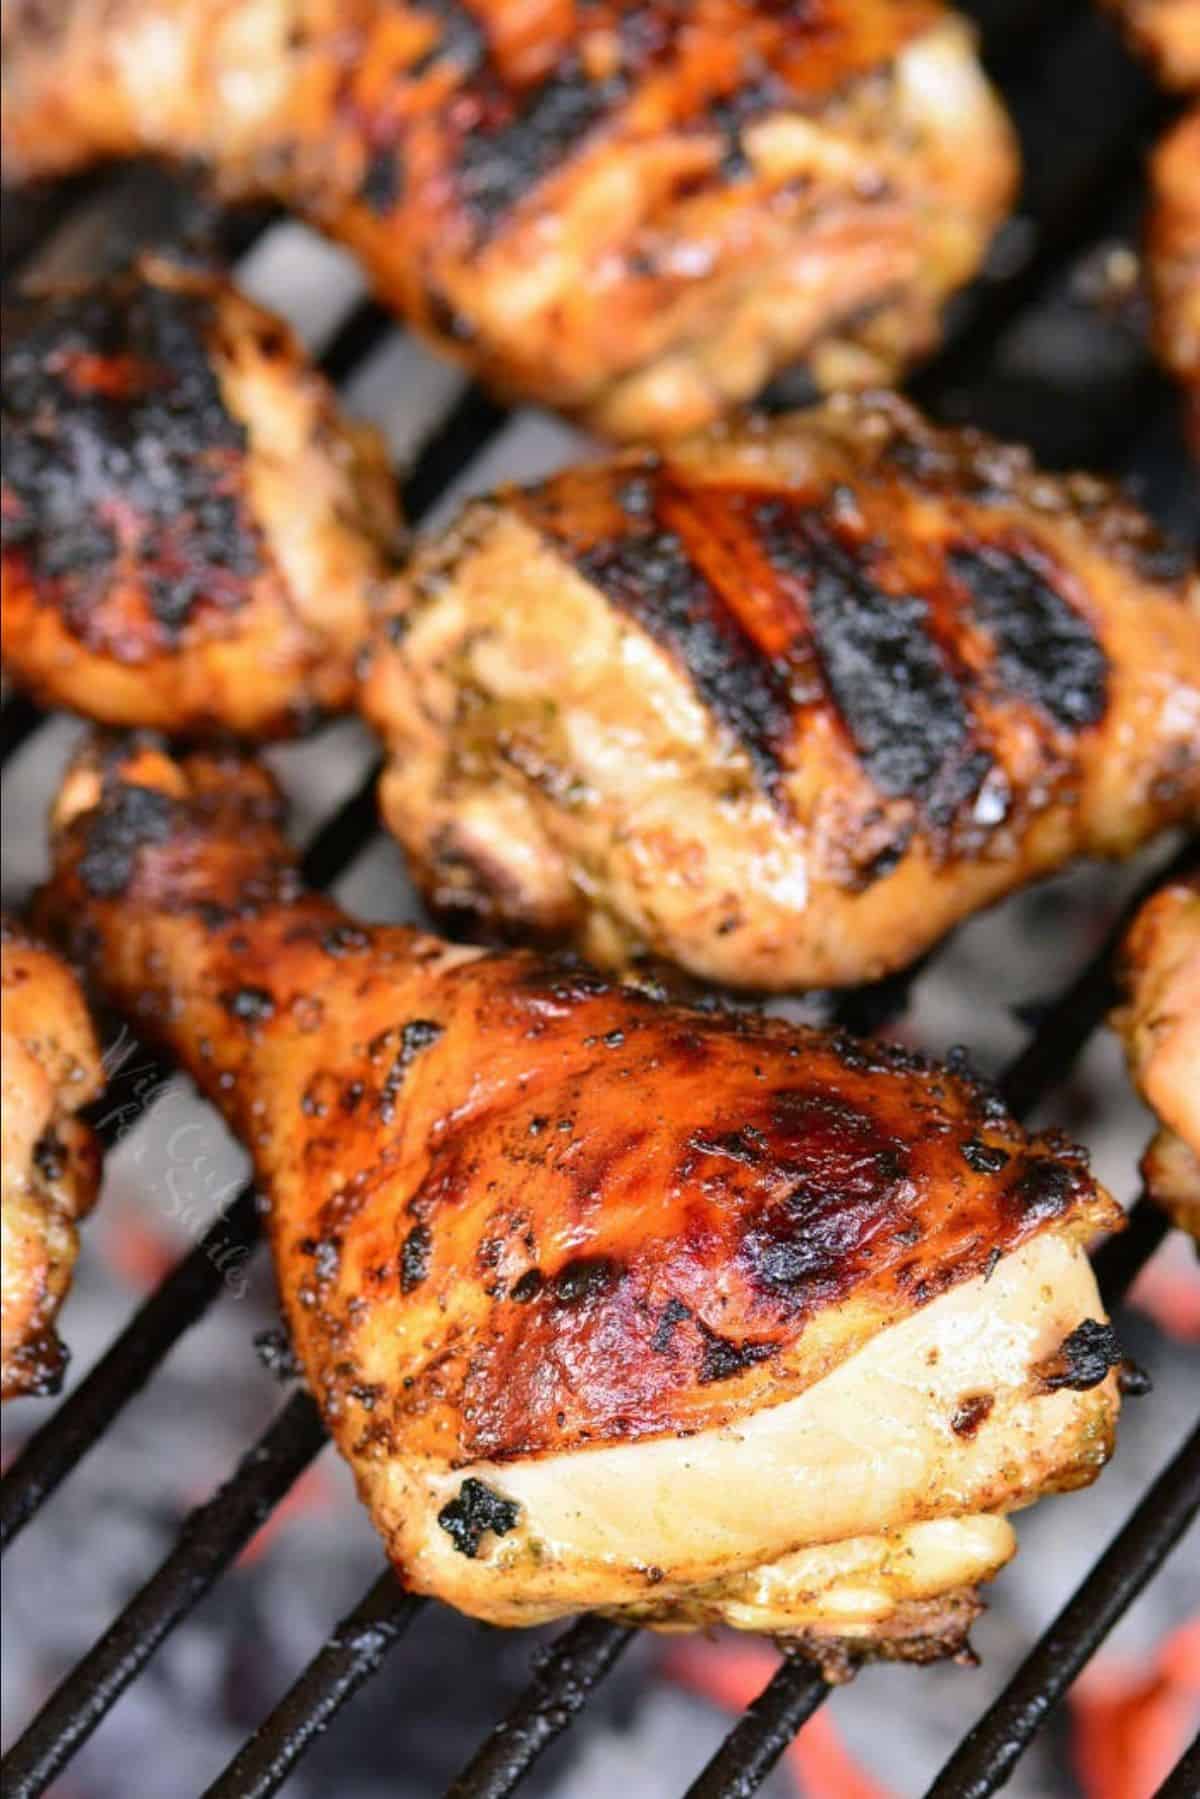 jerk marinated chicken drumstick cooking on the grill.